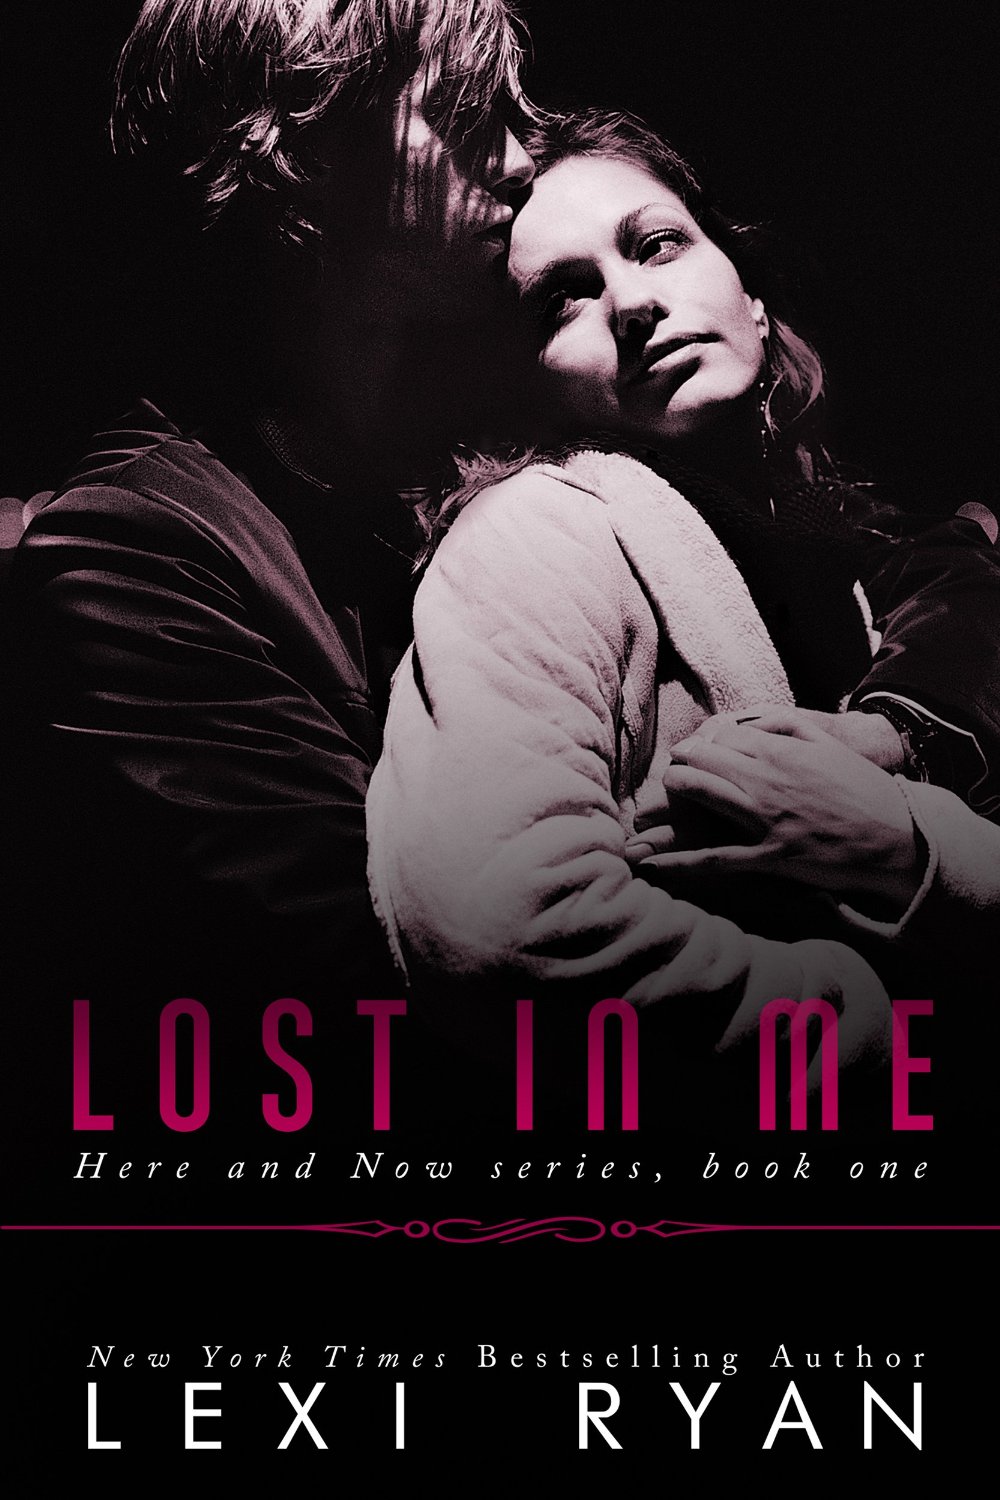 Lost in Me (Here and Now Book 1) by Lexi Ryan